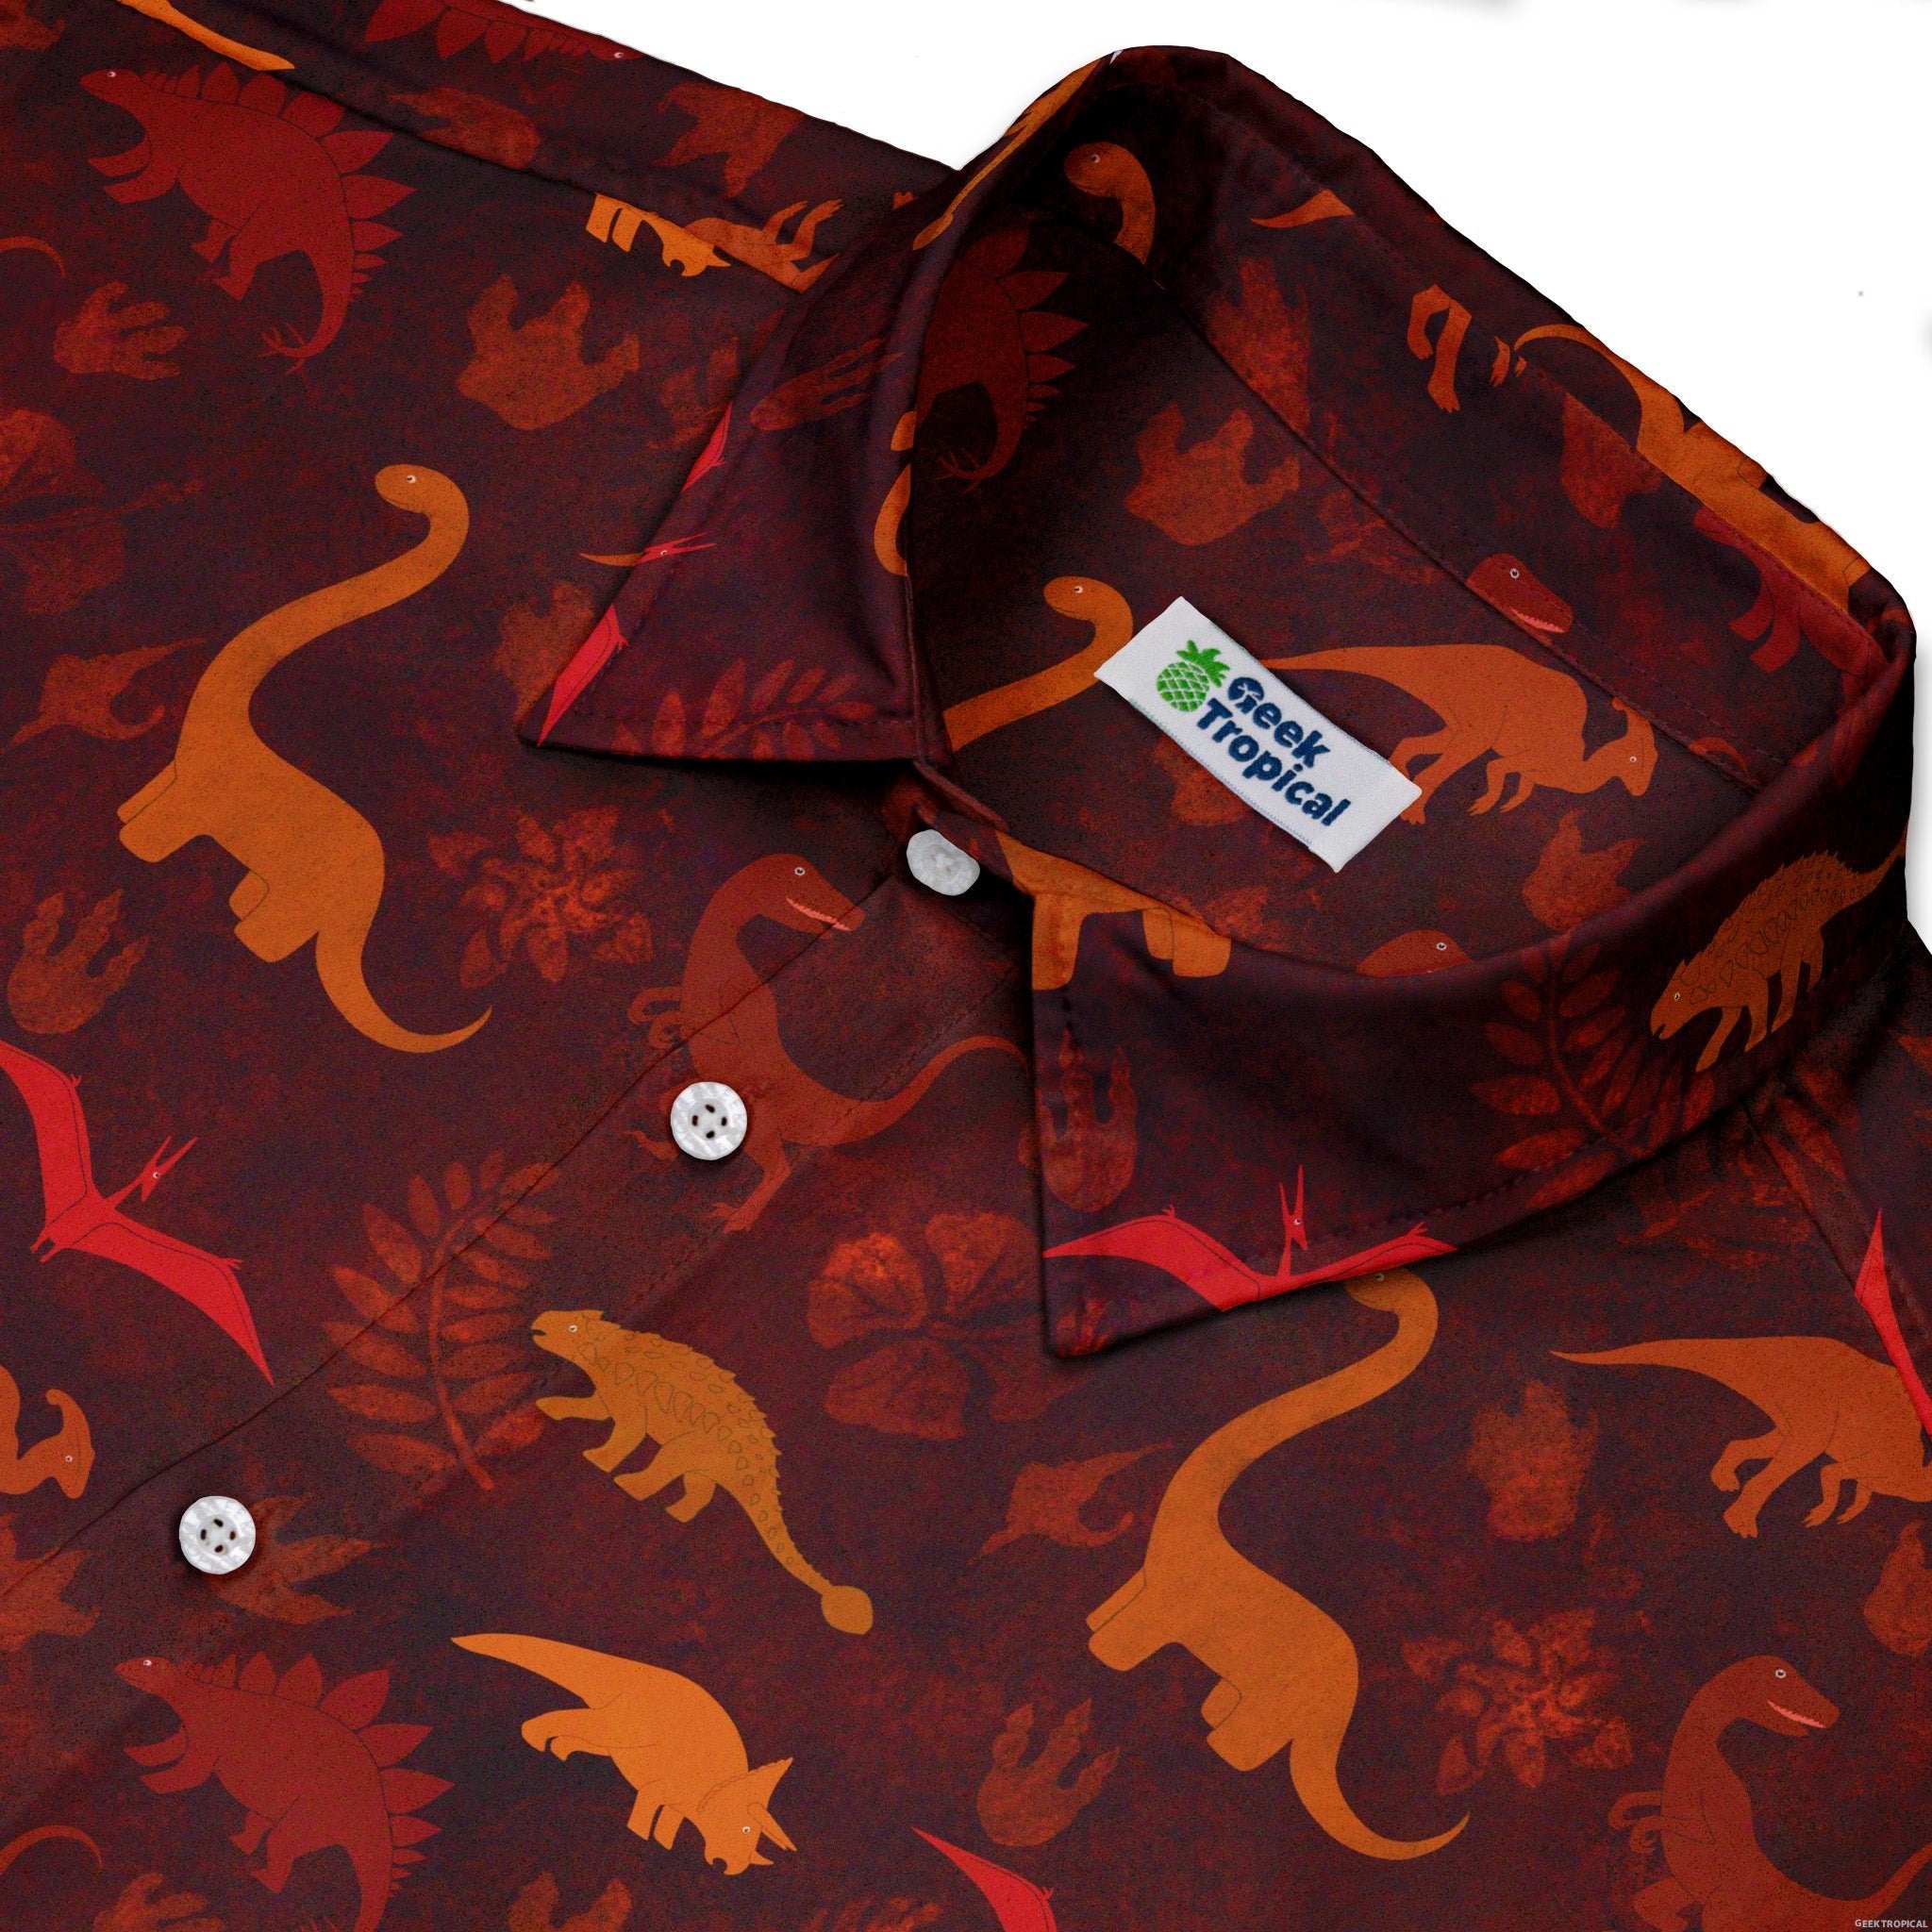 Dinosaur Tropical Sunset Button Up Shirt - adult sizing - Animal Patterns - Designs by Nathan